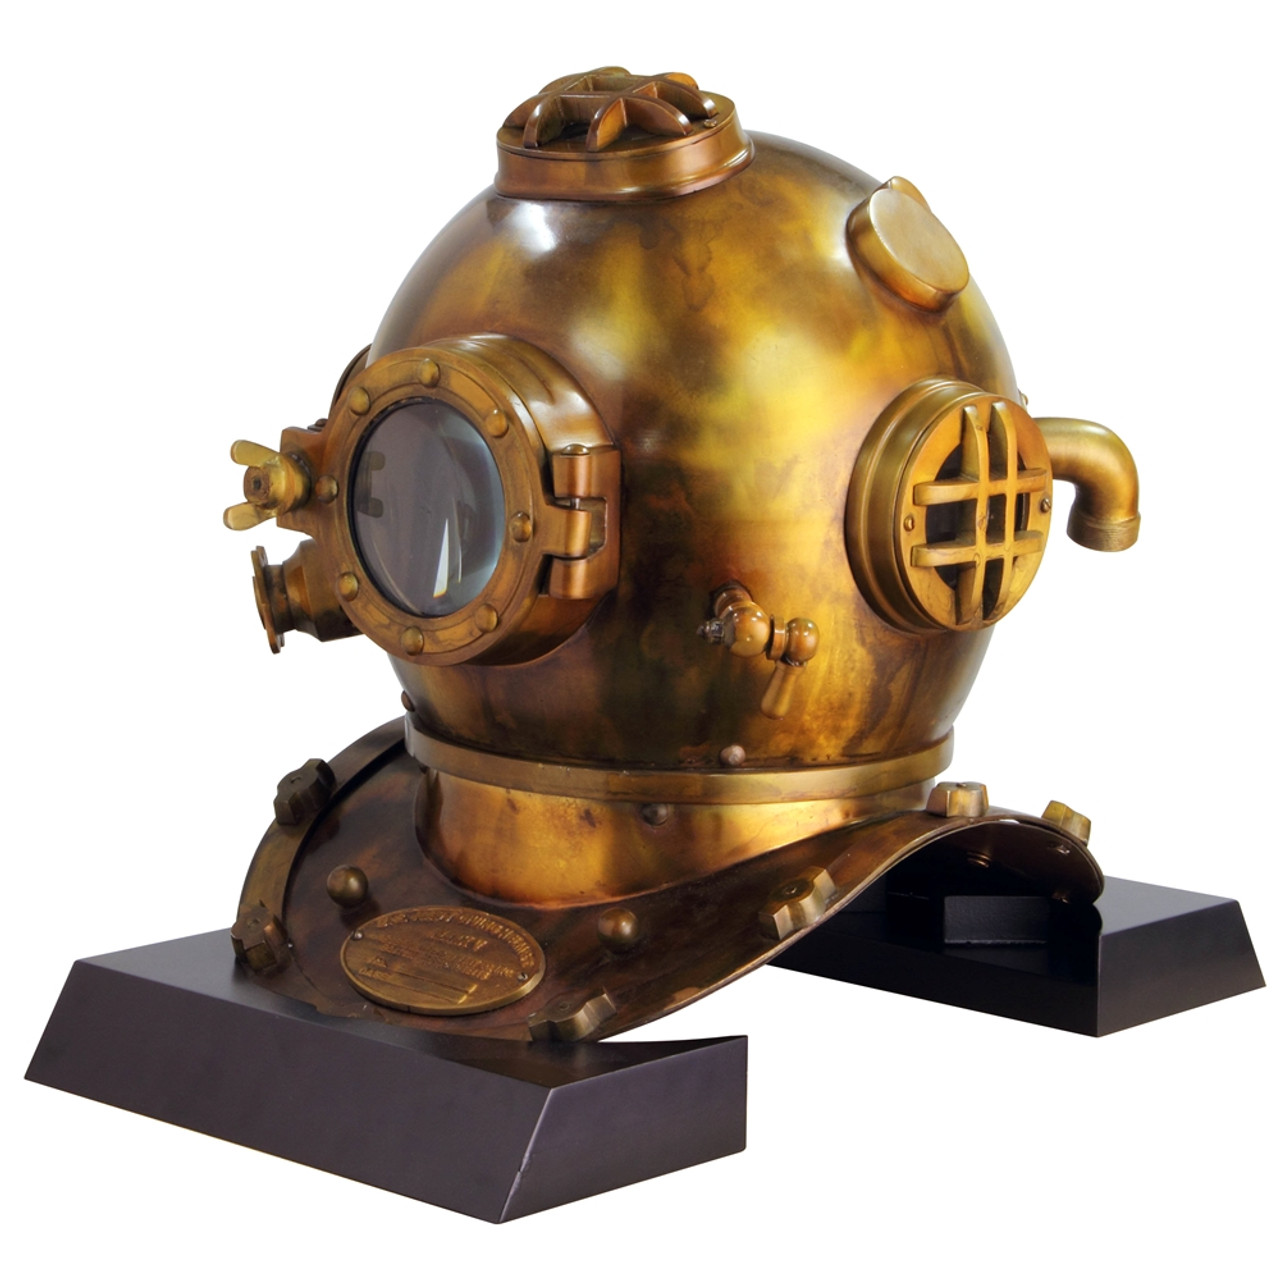 Reproduction US navy deep sea diver's copper and brass helmet